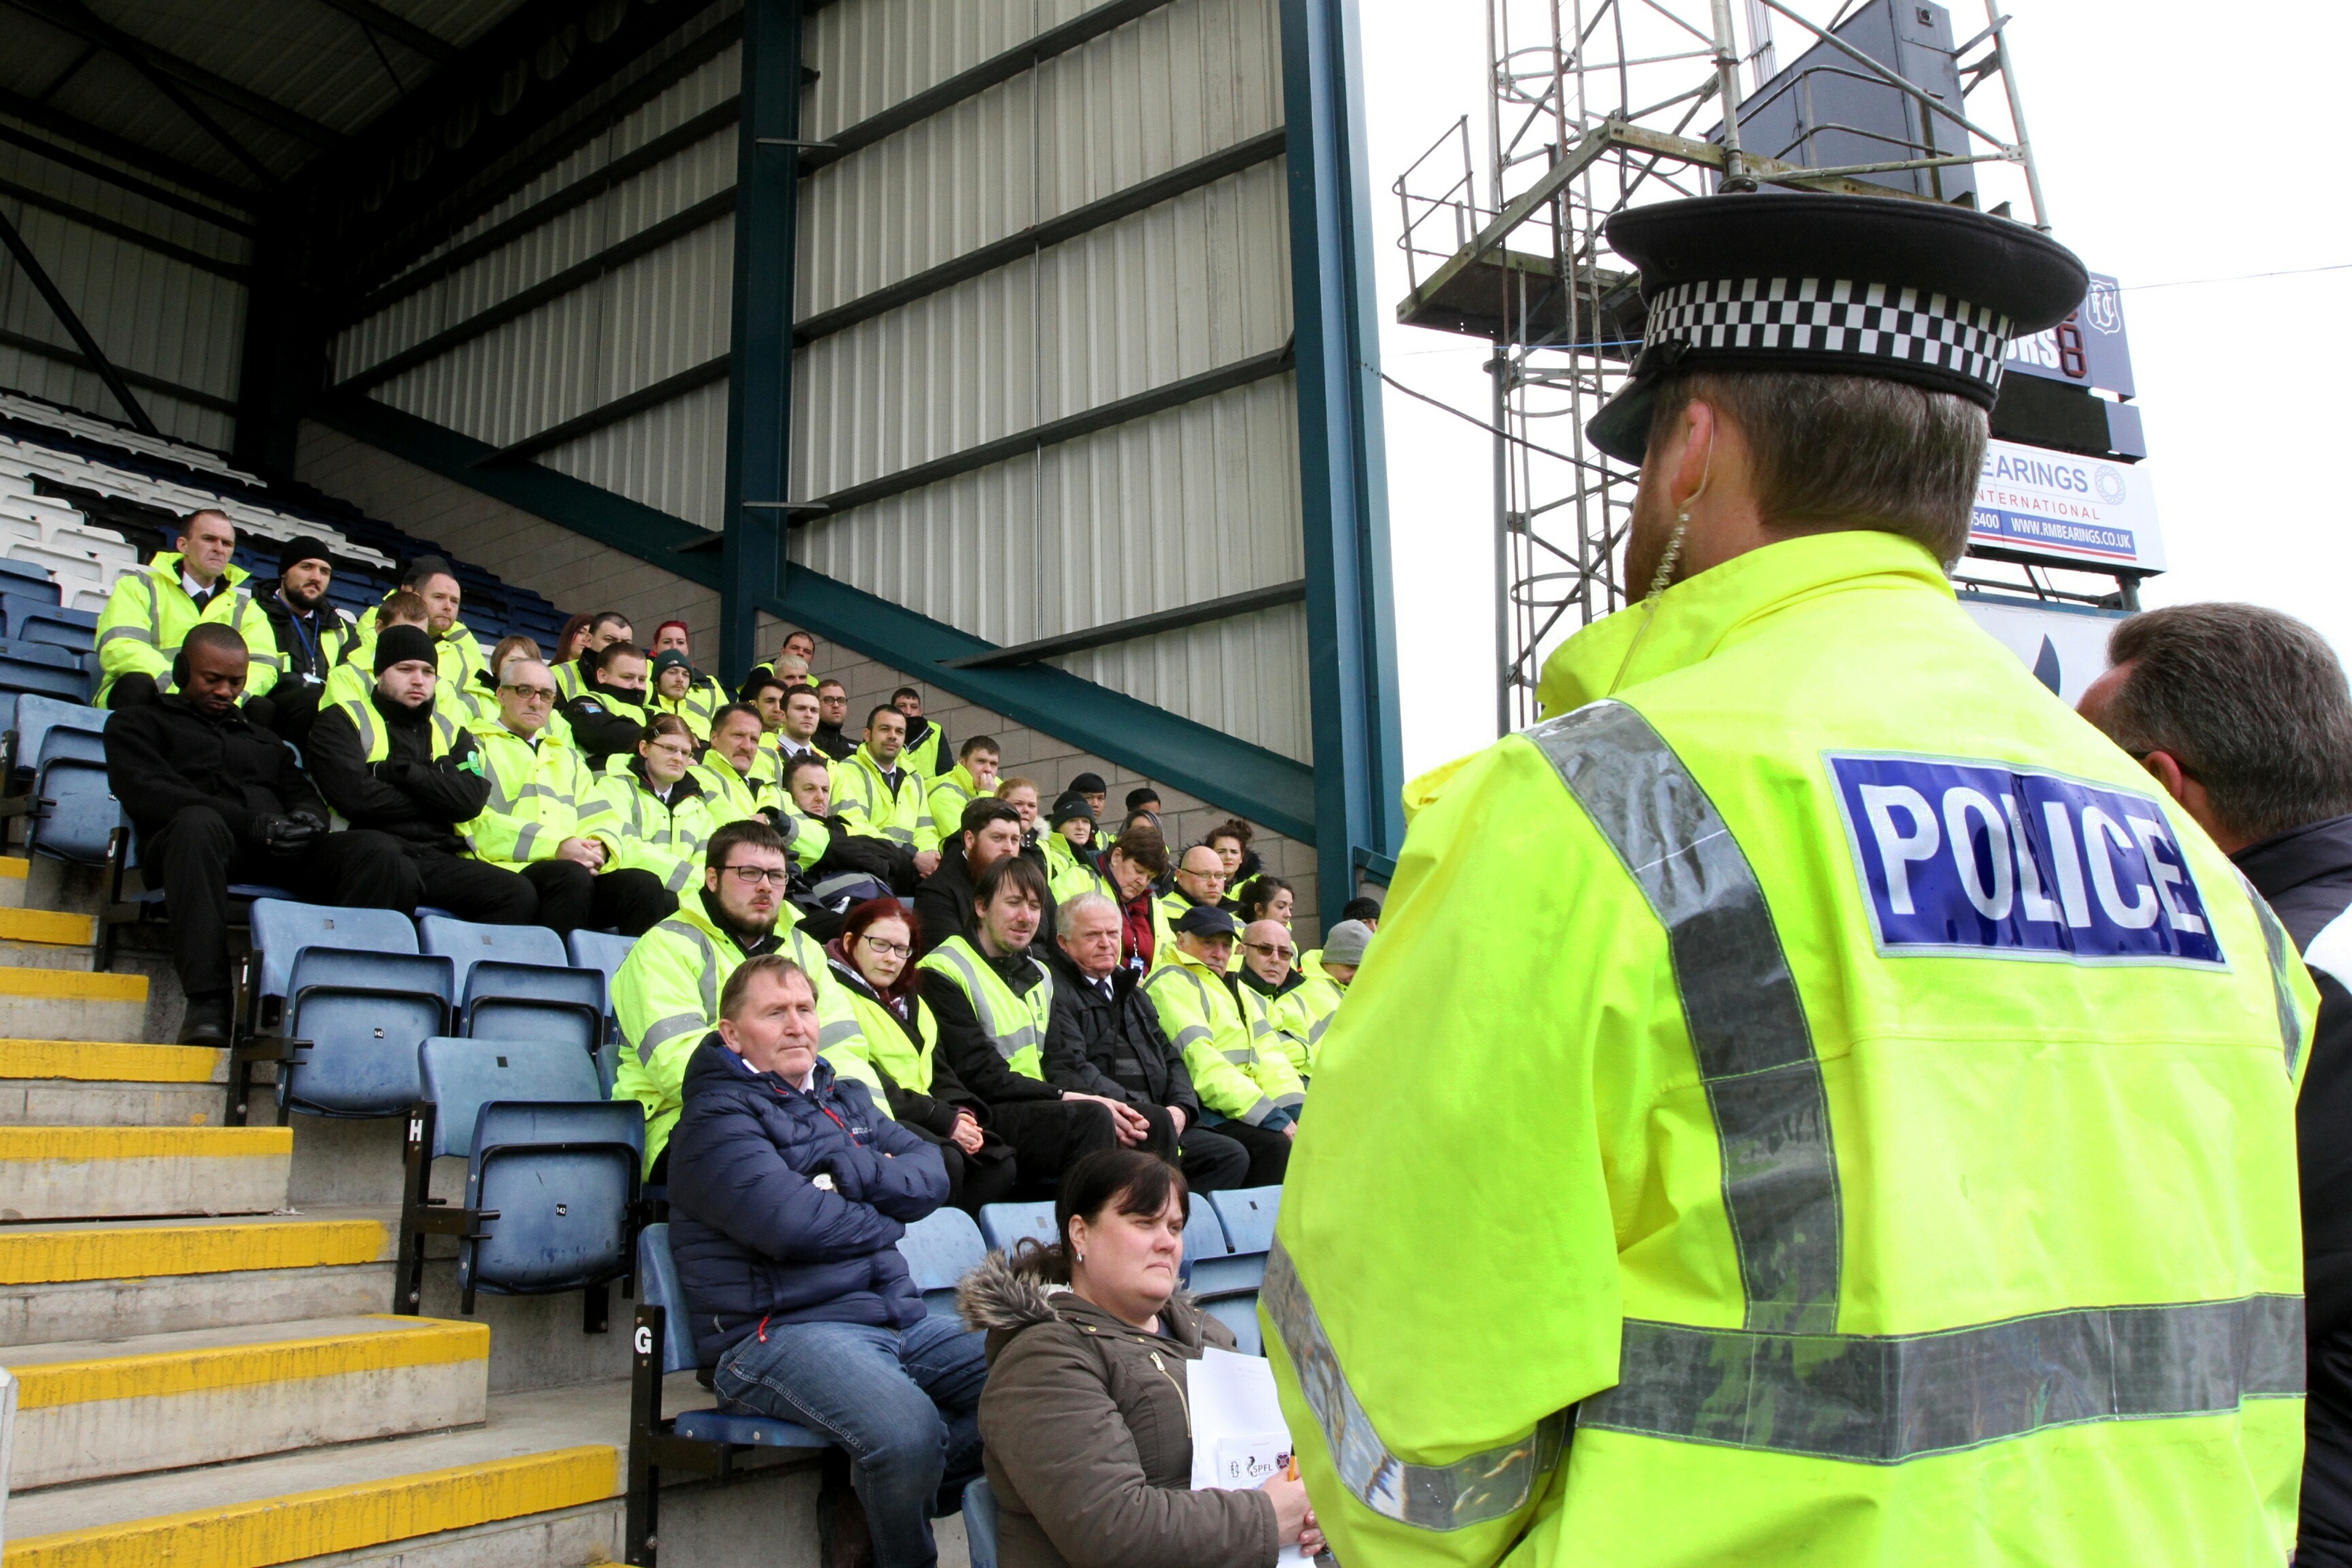 Stewards are briefed by police ahead of a match at Dens Park.